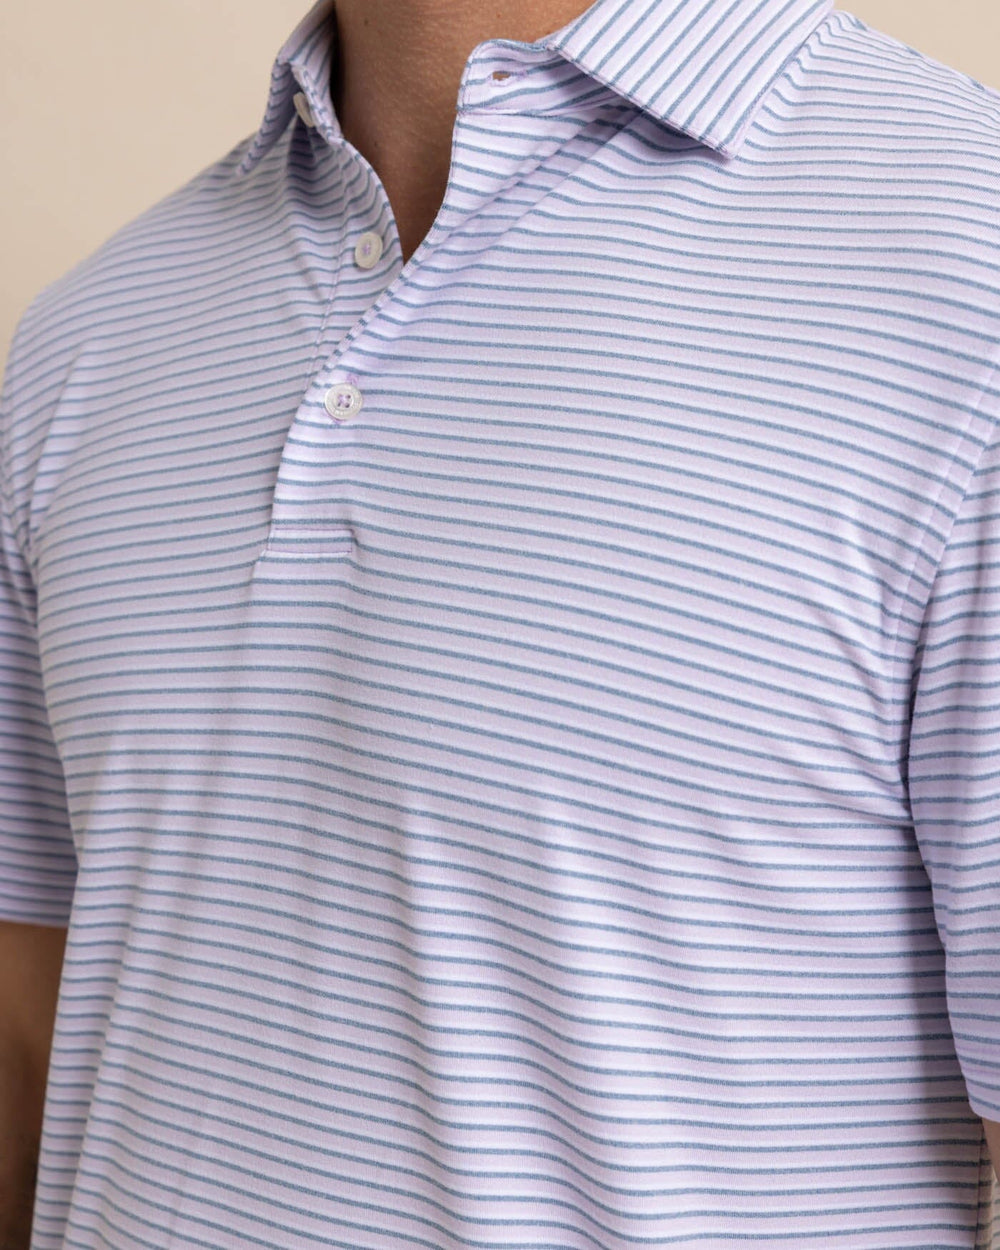 The detail view of the Southern Tide Ryder Heather Halls Performance Polo by Southern Tide - Heather Orchid Petal